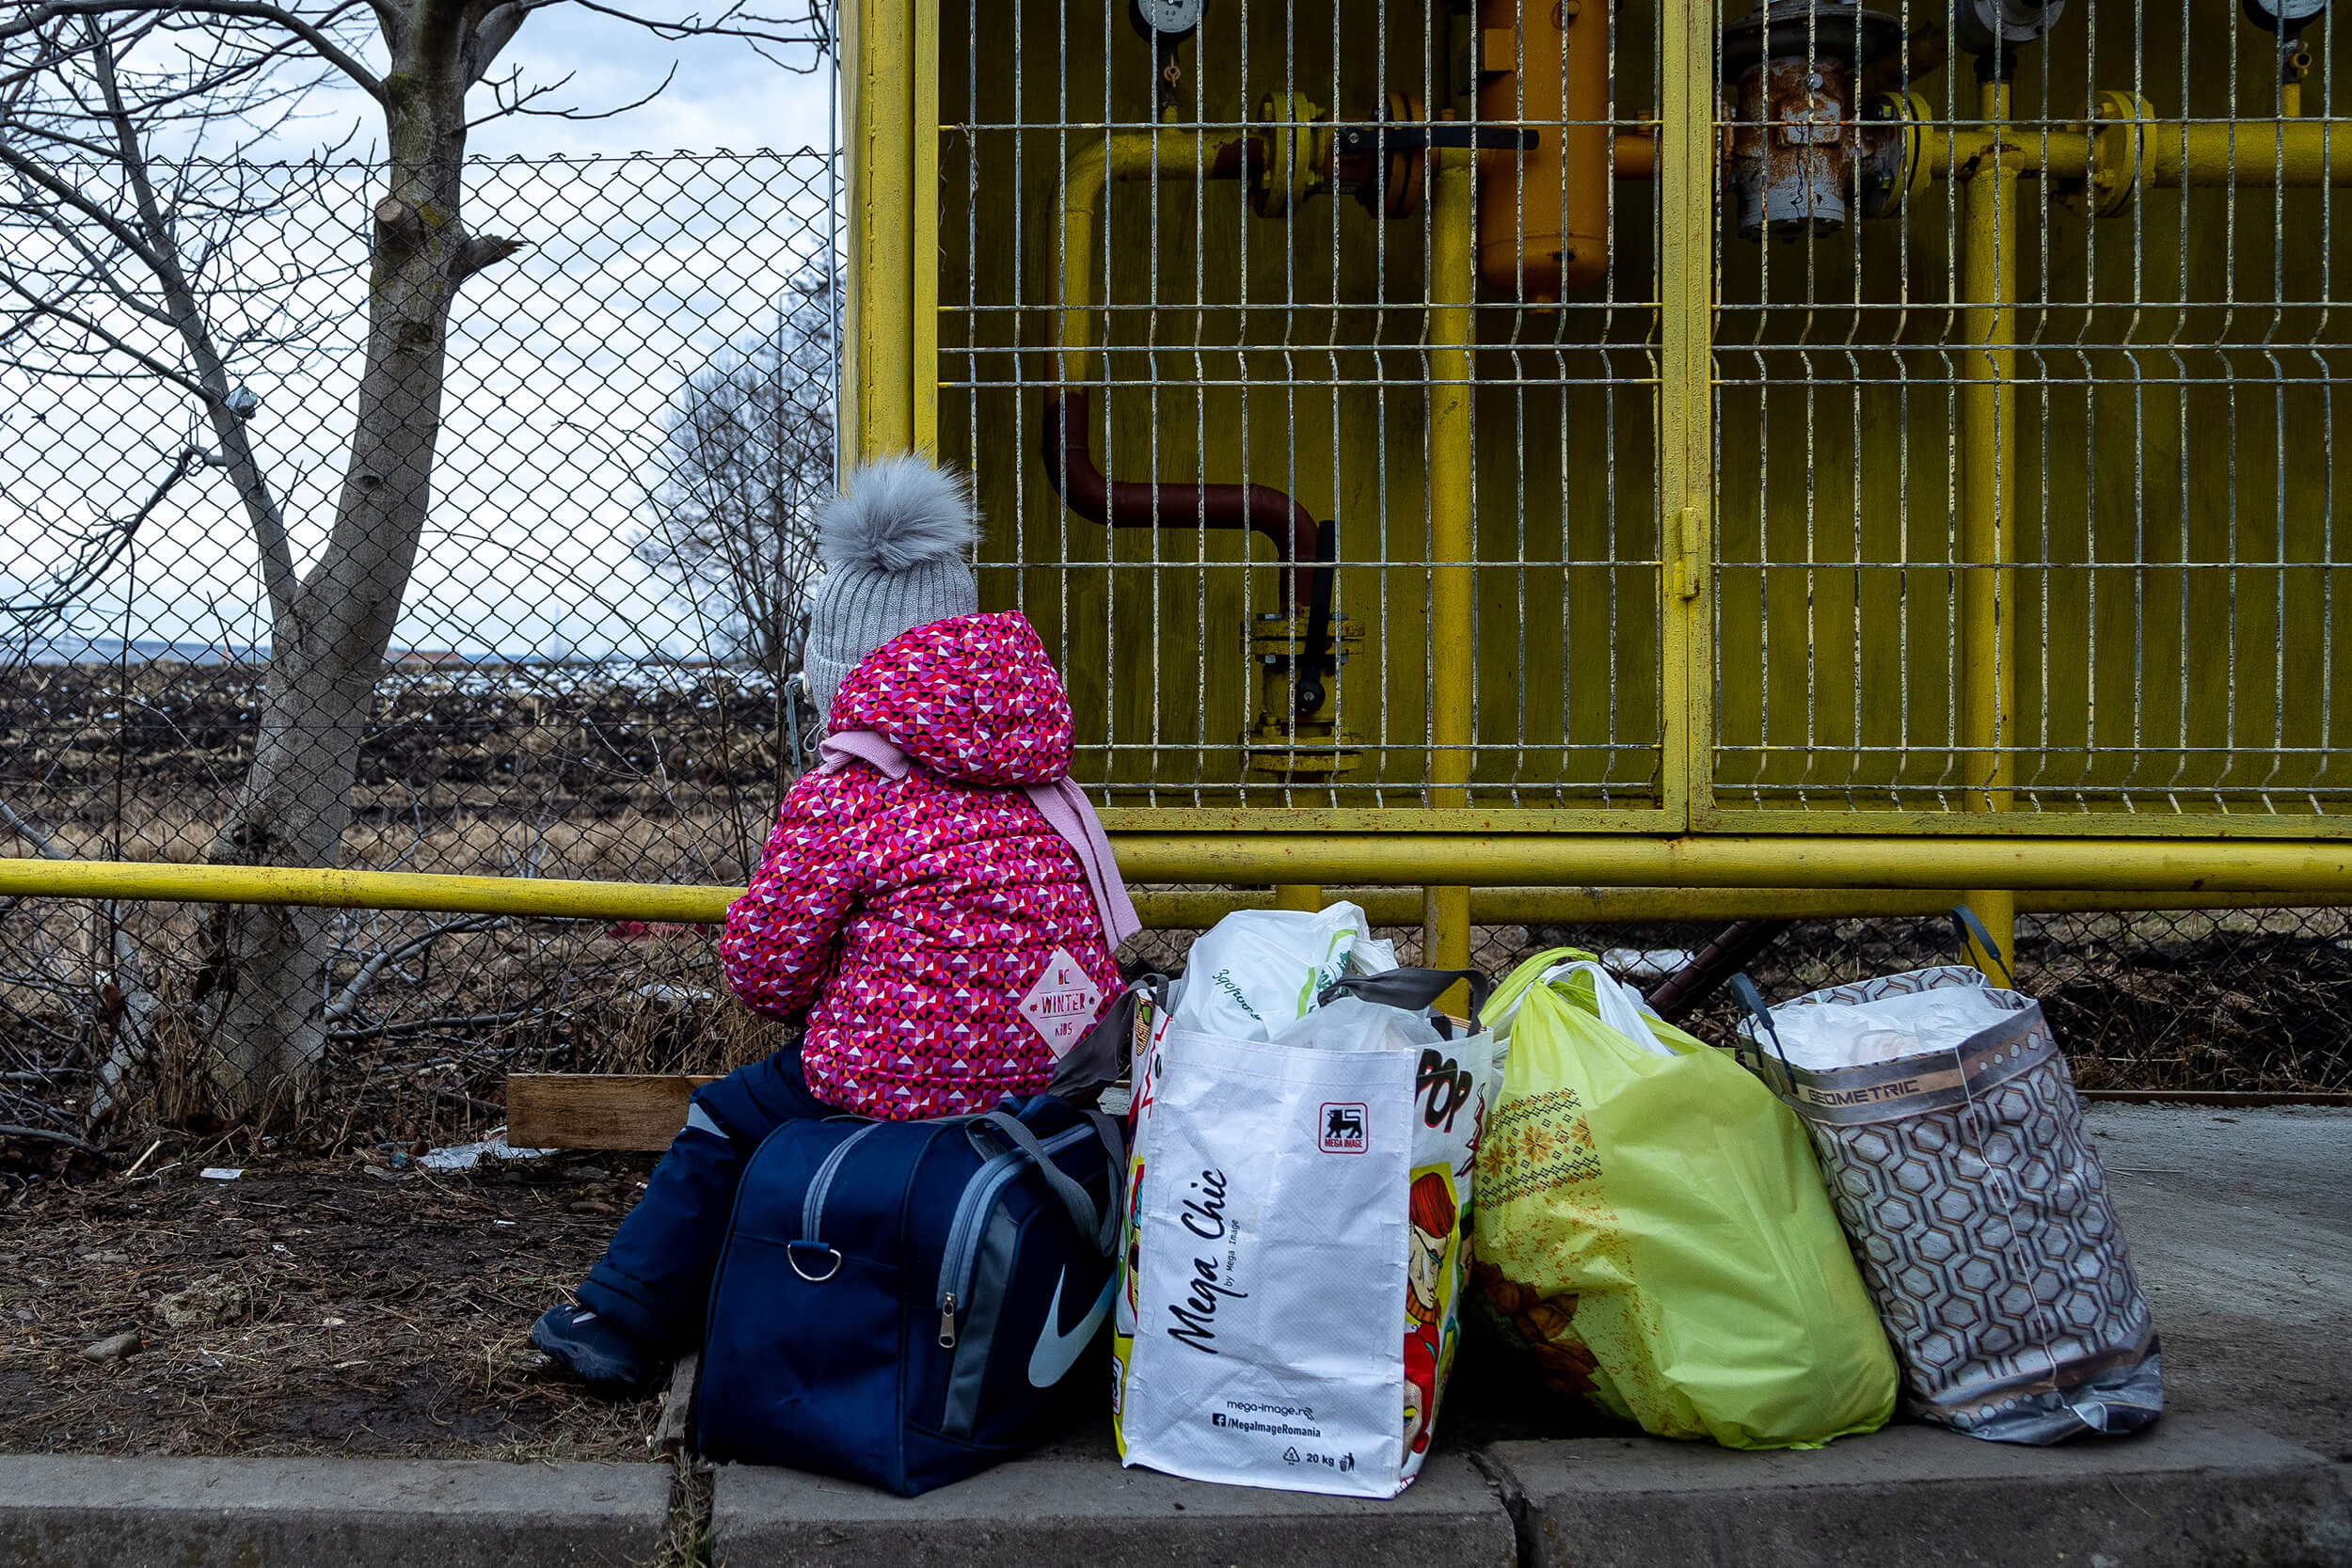 A two-year-old girl sits on her family’s luggage while waiting for a van that will take them to buses waiting to take them to other cities in Romania or to different countries across Europe.